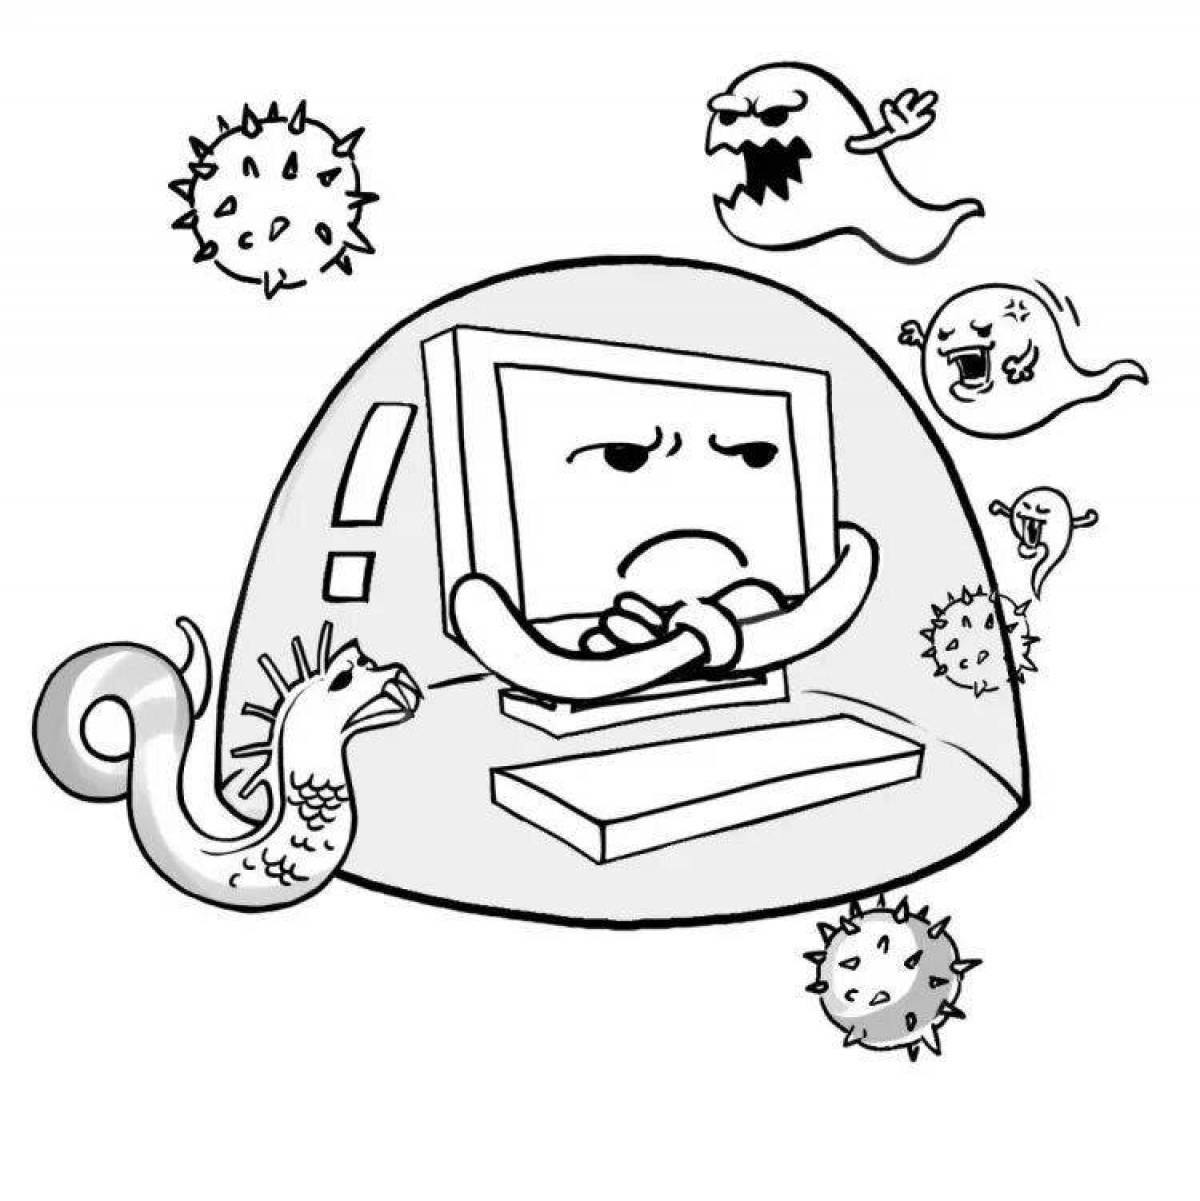 Delightful web security coloring page